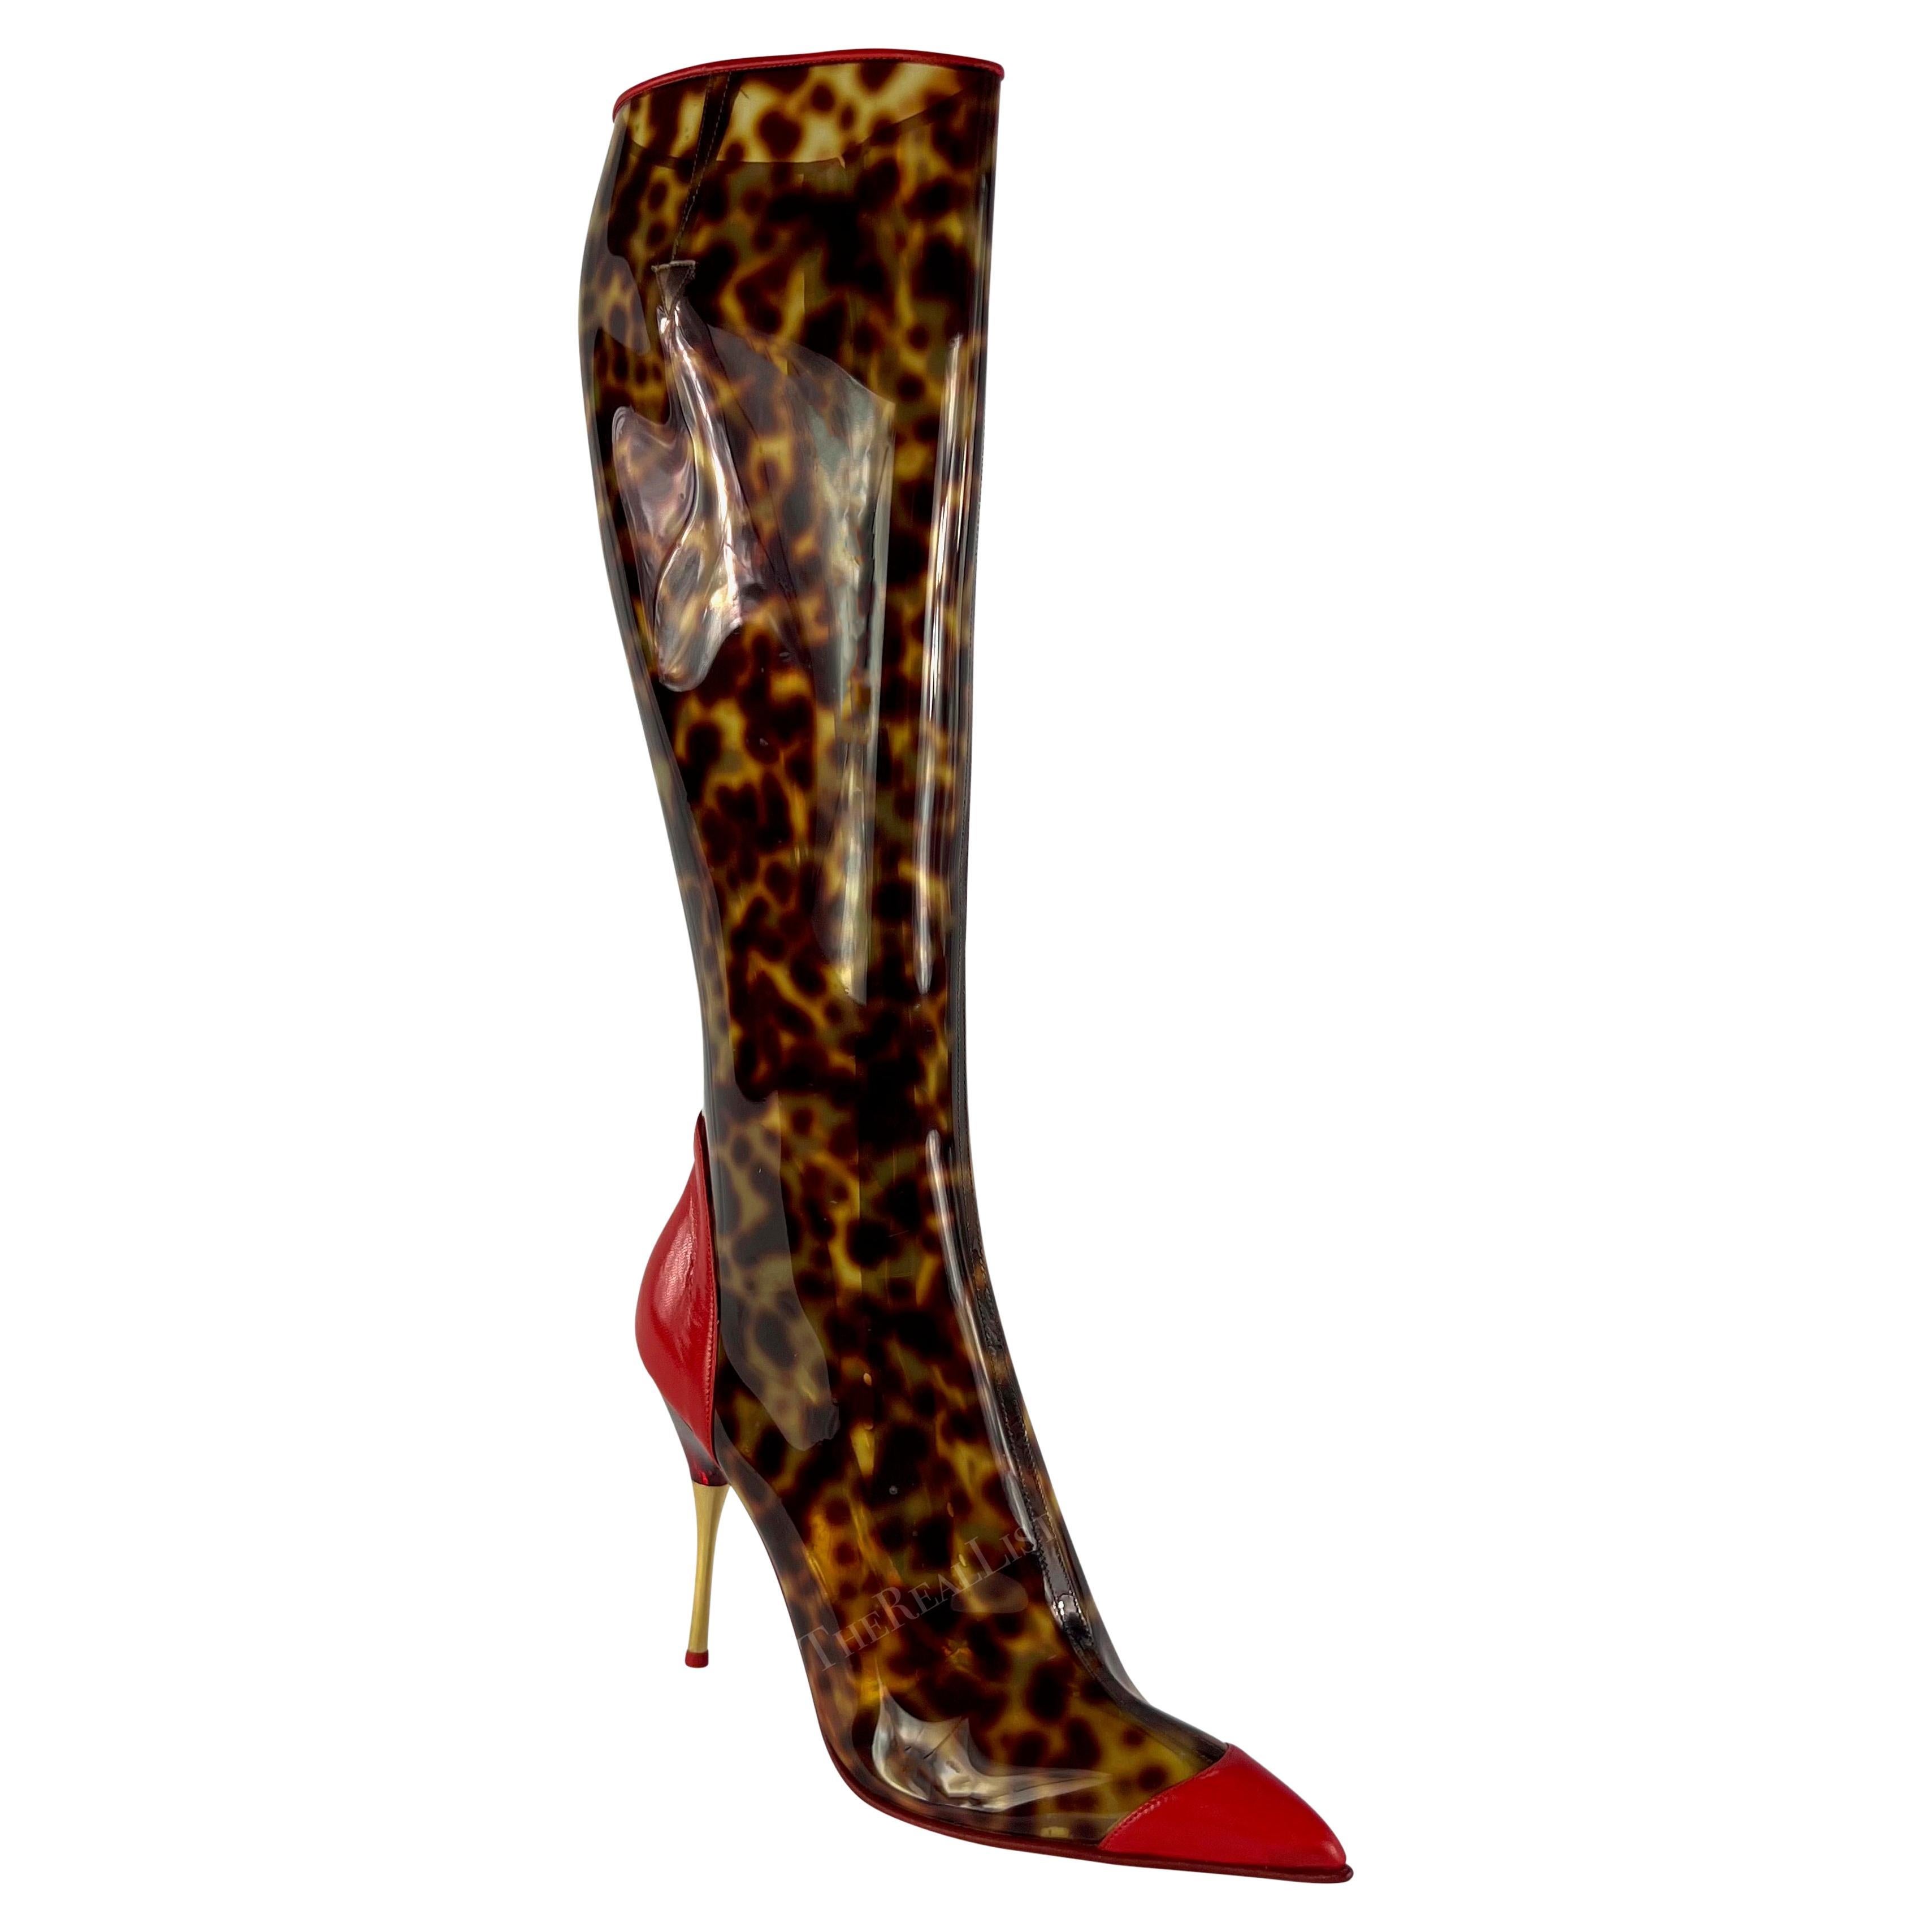 Presenting a pair of spotted brown PVC Roberto Cavalli heeled boots. From the Spring/Summer 2003 collection, these fabulous boots are constructed of spotted brown PVC, reminiscent of tortoiseshell, and feature bright red leather accents. Never worn